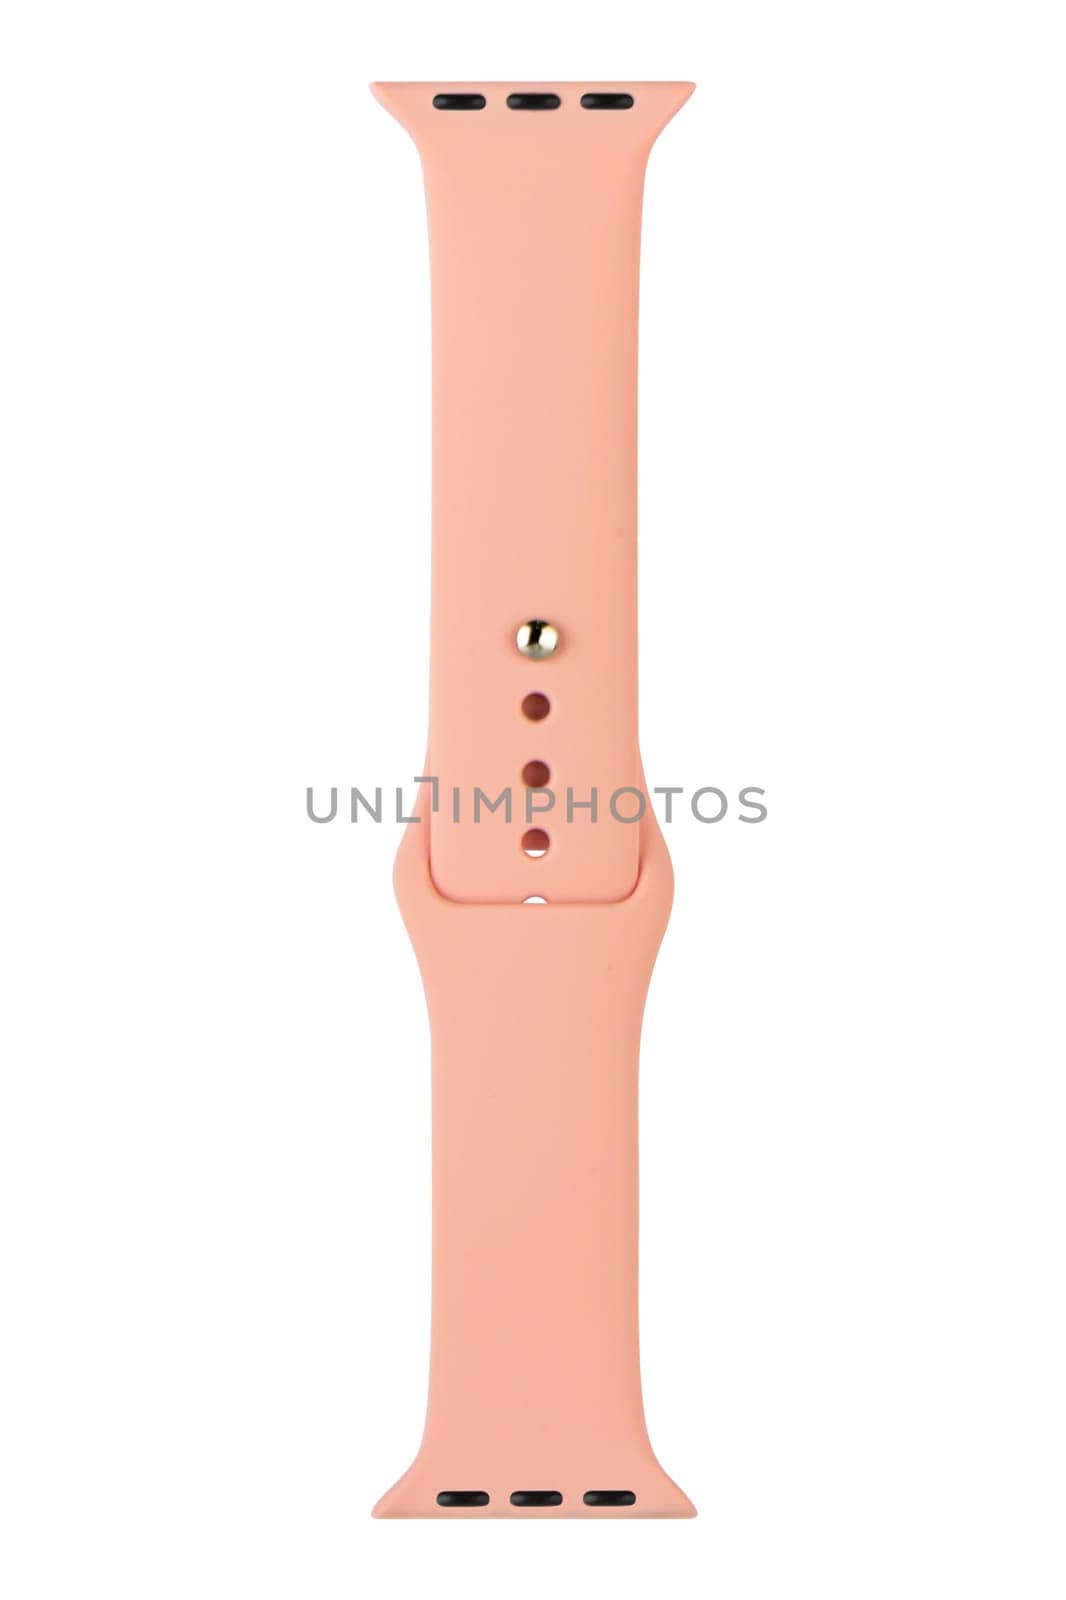 Silicone strap for watch, white background in insulation